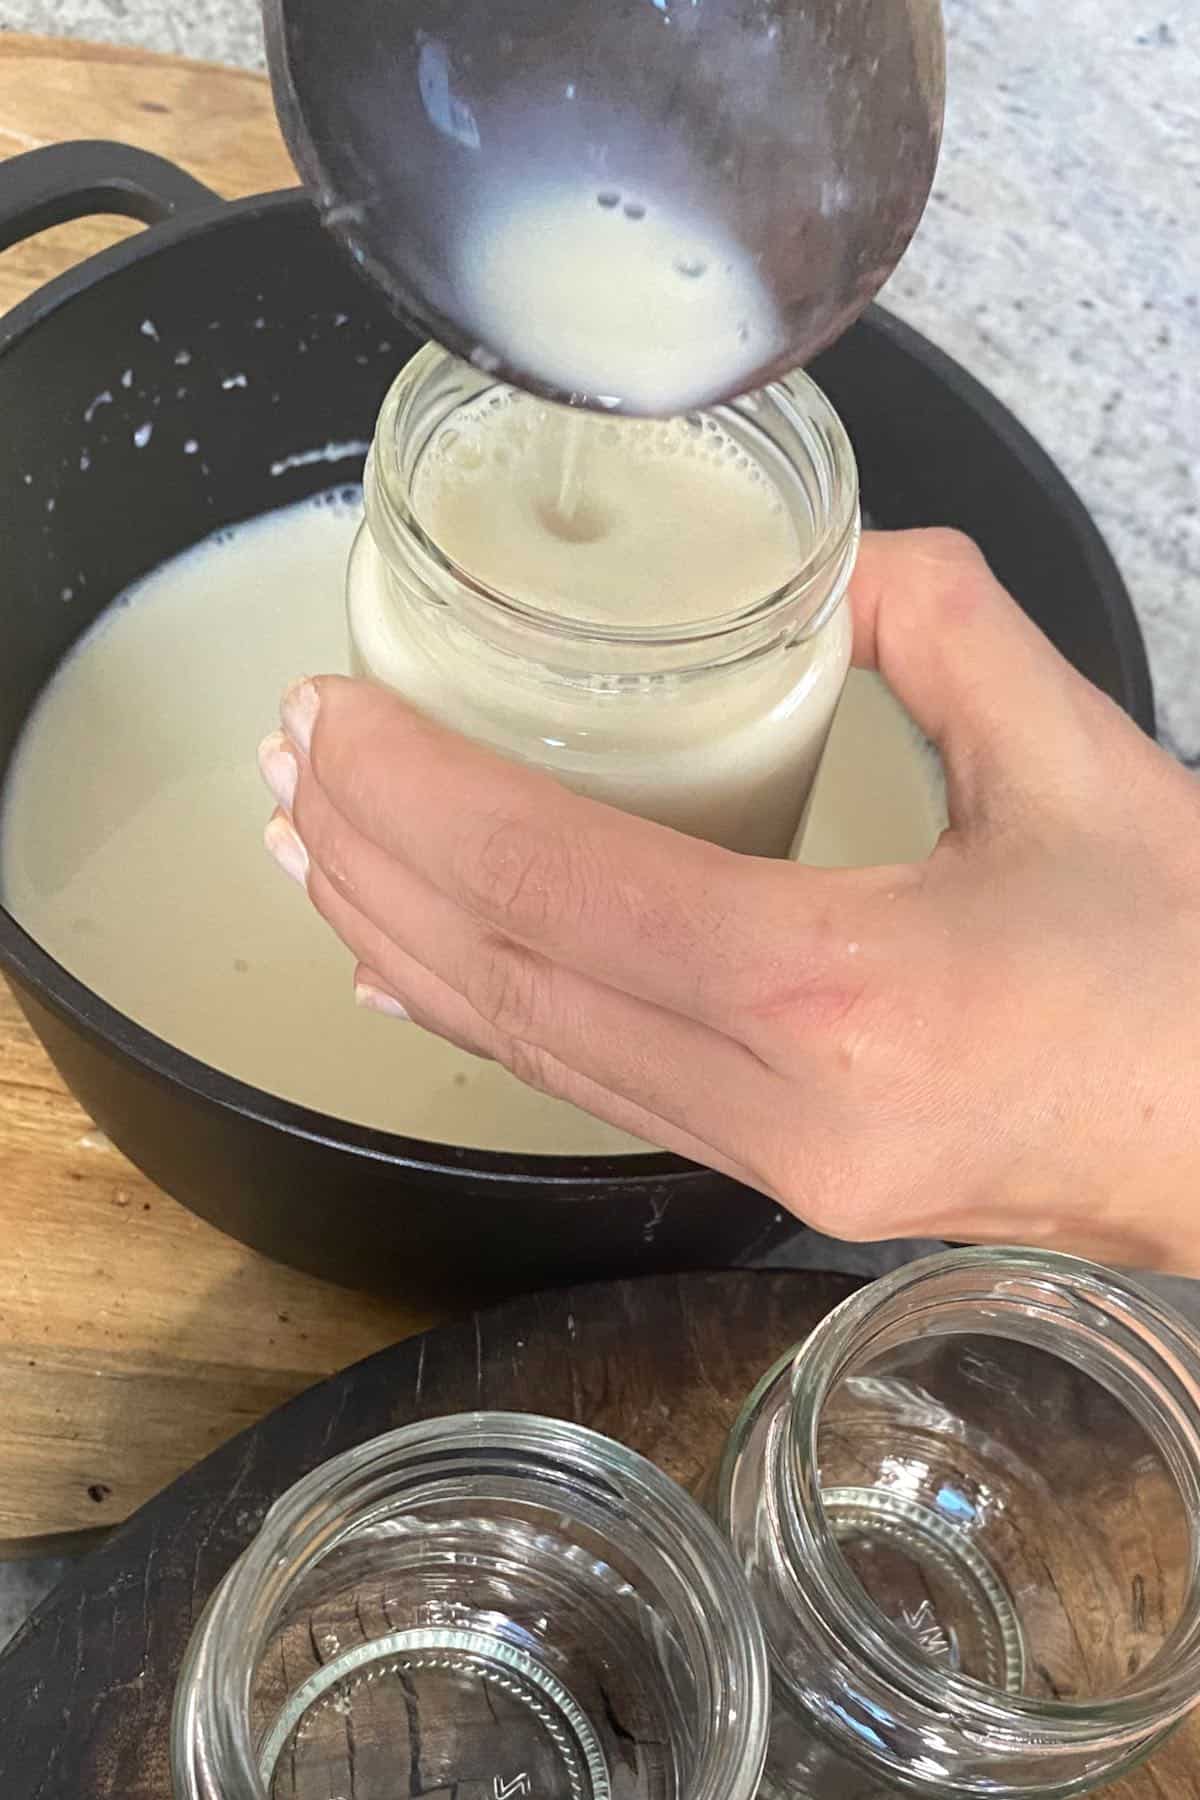 Homemade Chinese Soy Milk Recipe - Cooking Therapy